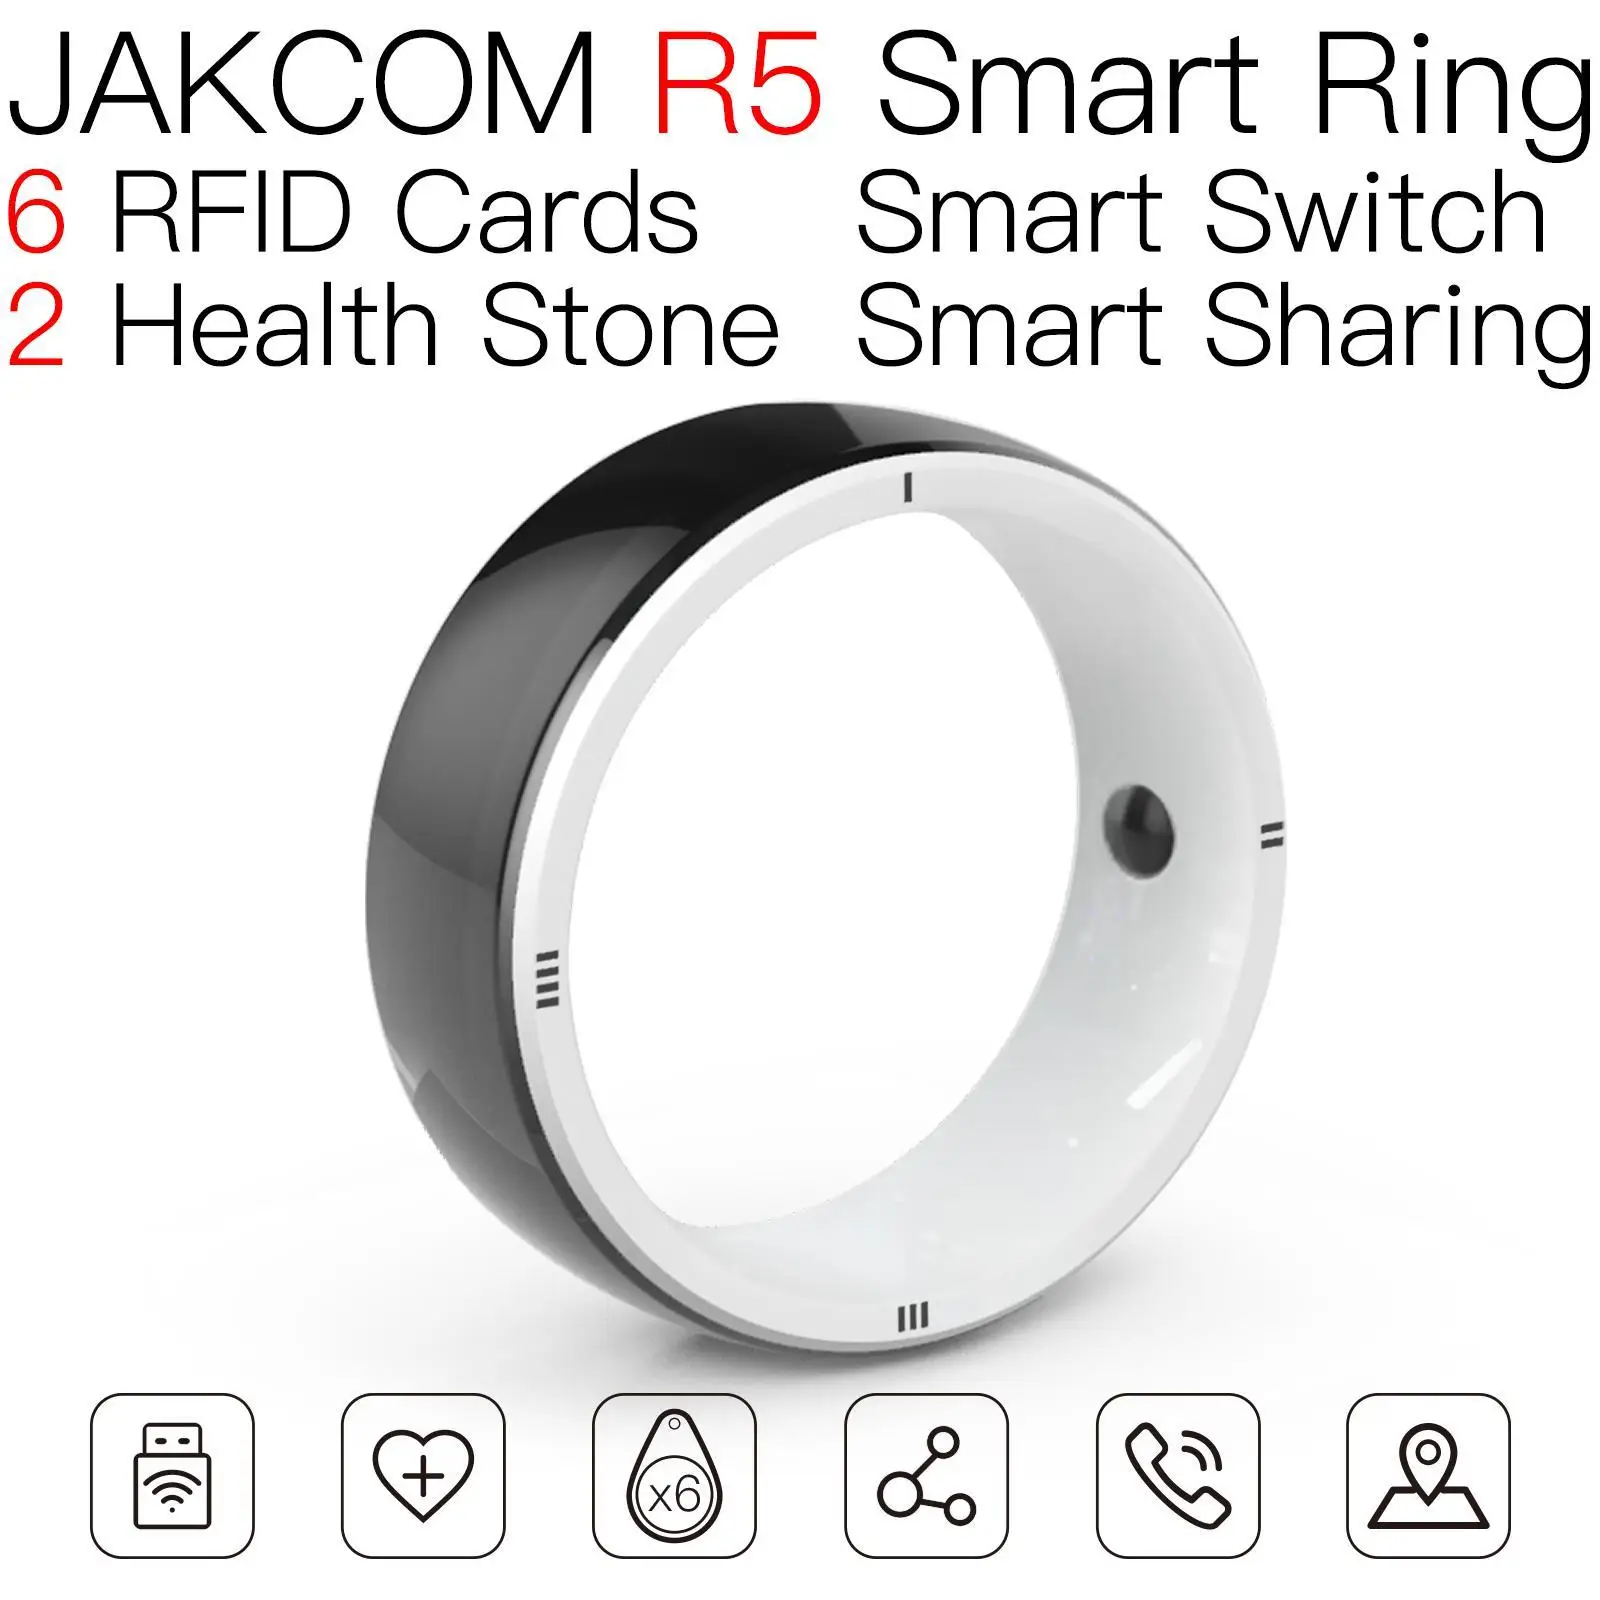 

JAKCOM R5 Smart Ring Super value than stratos 2 armor 17 coaster smart band home wifi dt100 watch 3 wrist watches